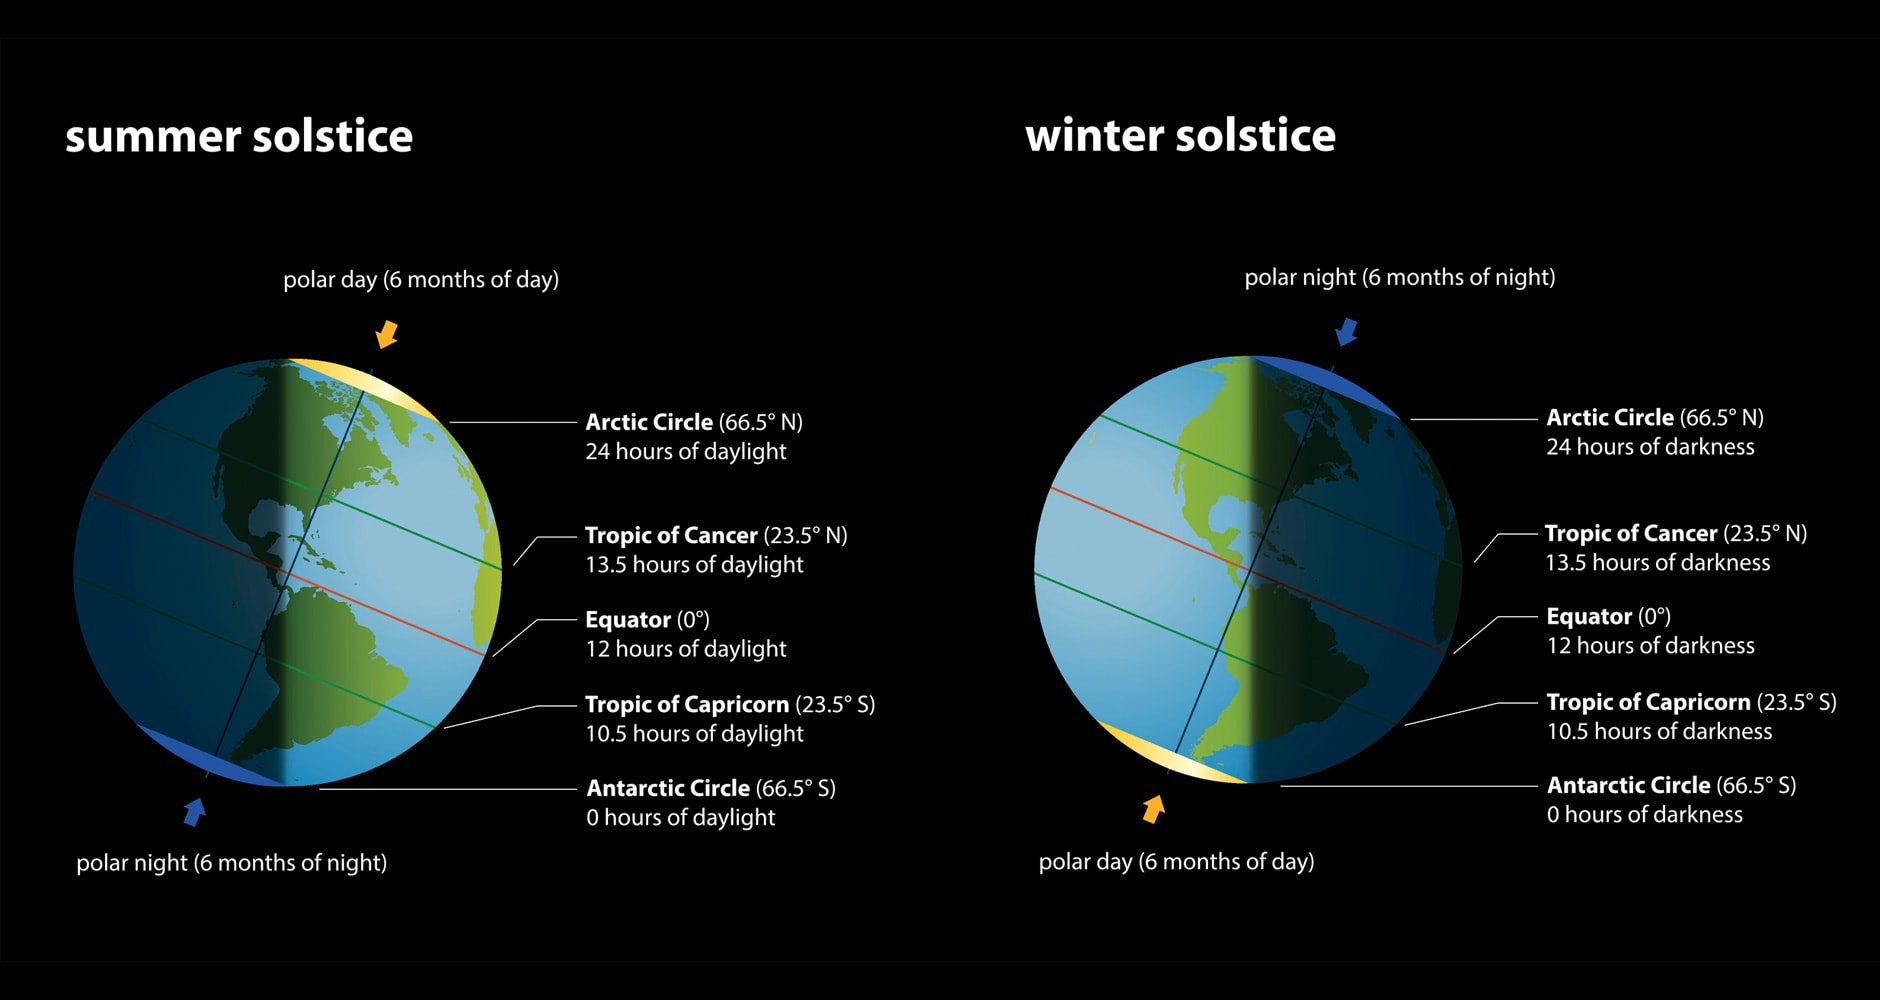 equinox and solstice - image of summer and winter solstices